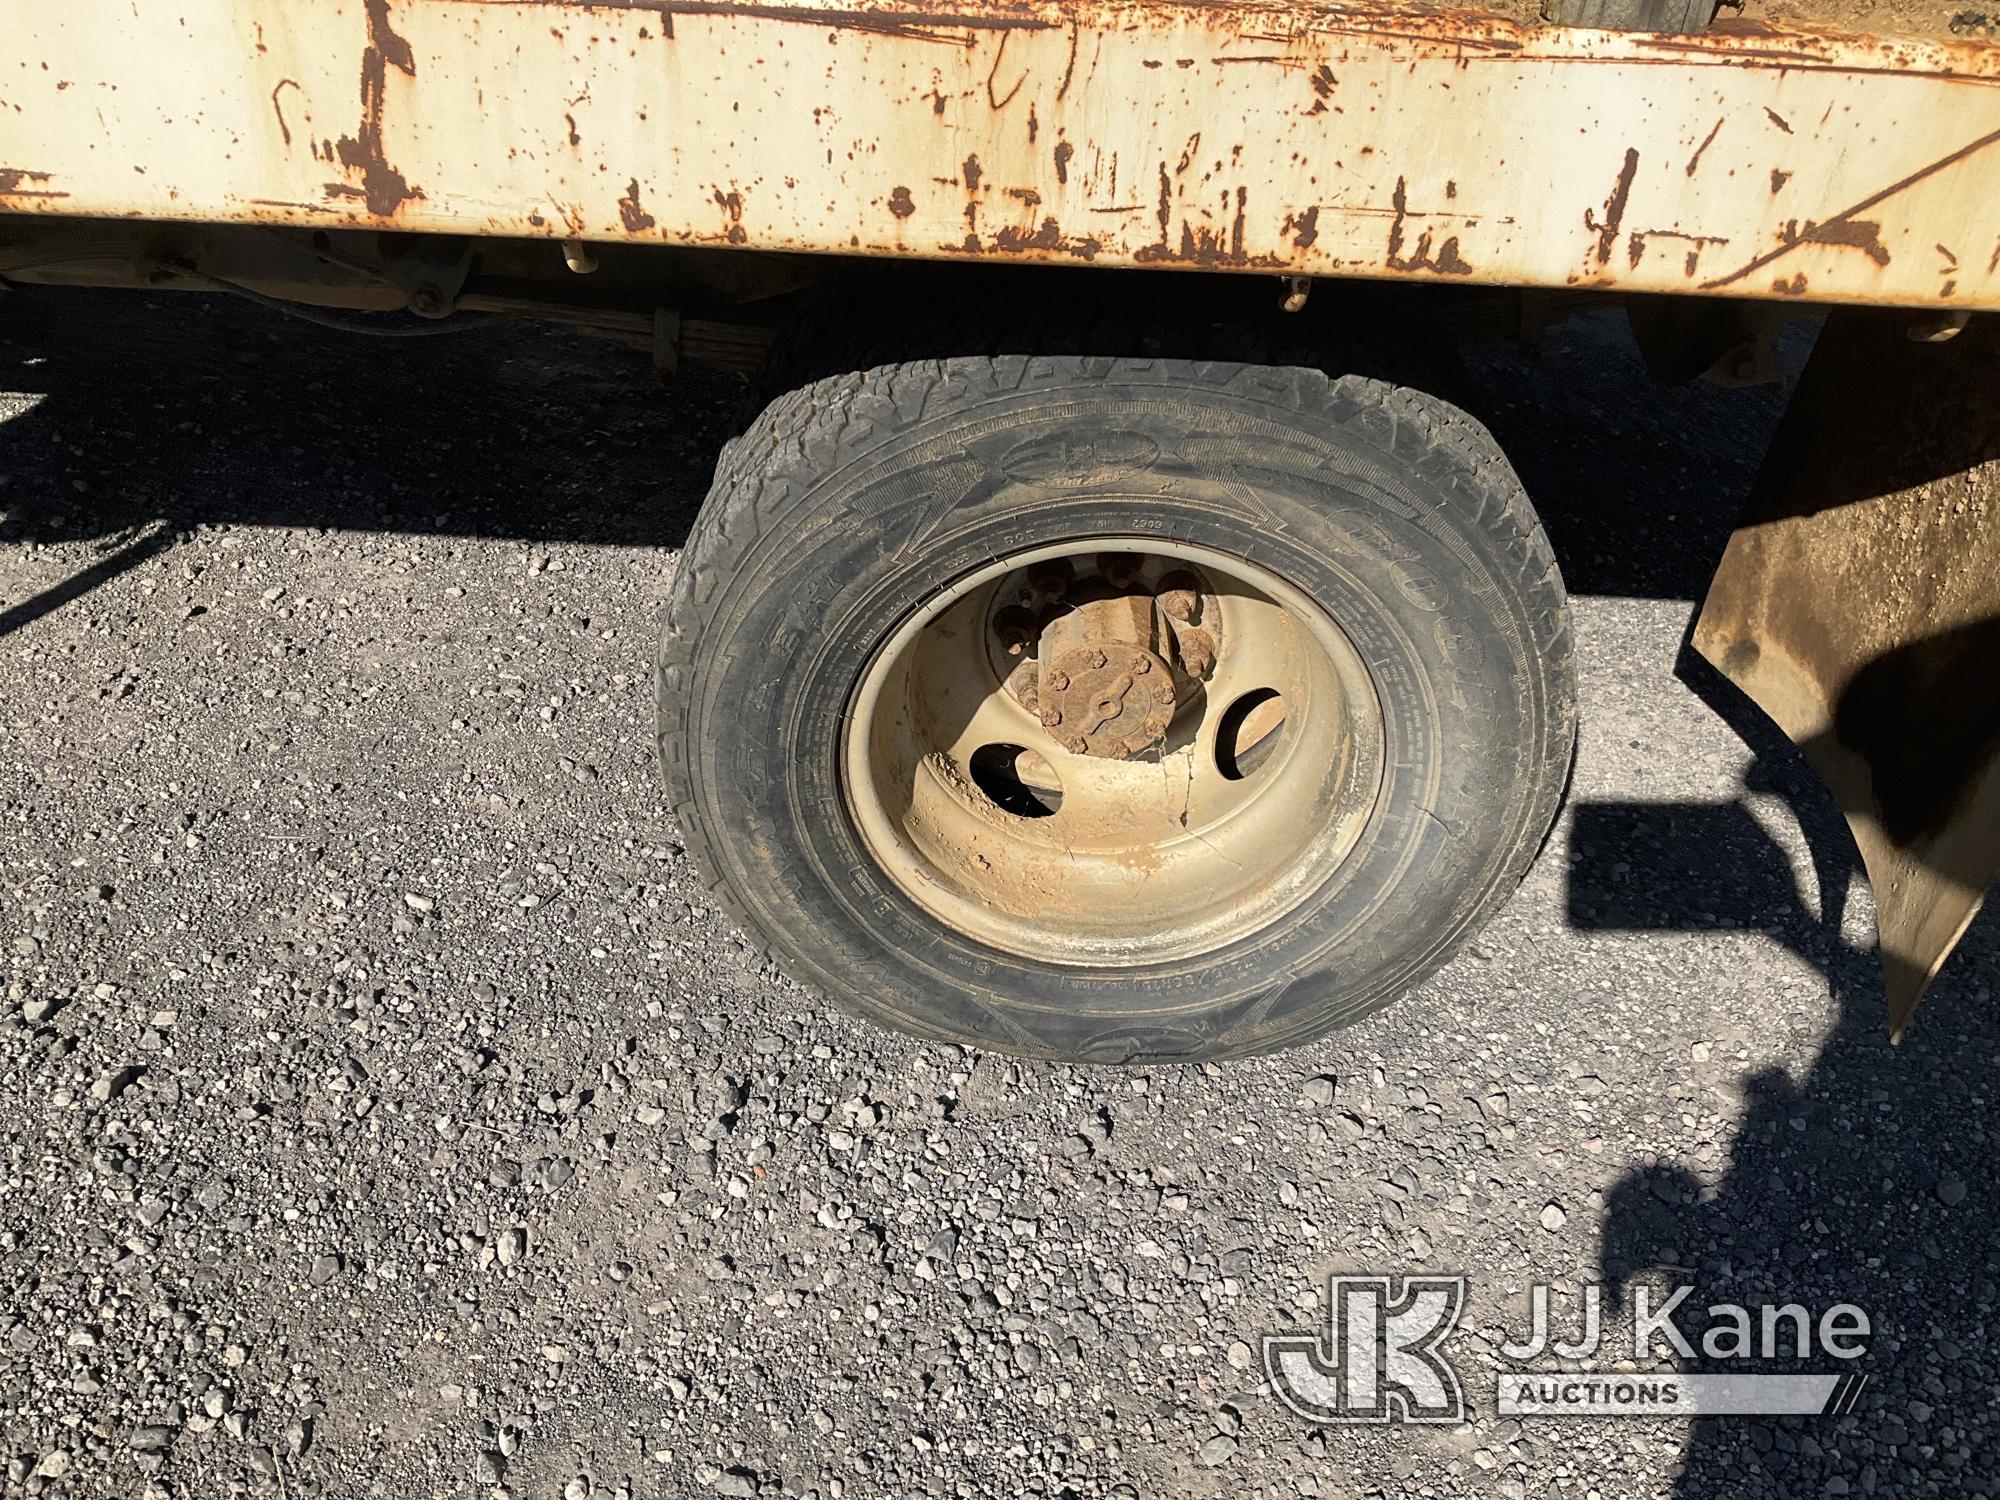 (Jurupa Valley, CA) 1989 Ford F350 Flatbed Truck Runs rough, Moves & Operates, Squishy Brake Pedal,